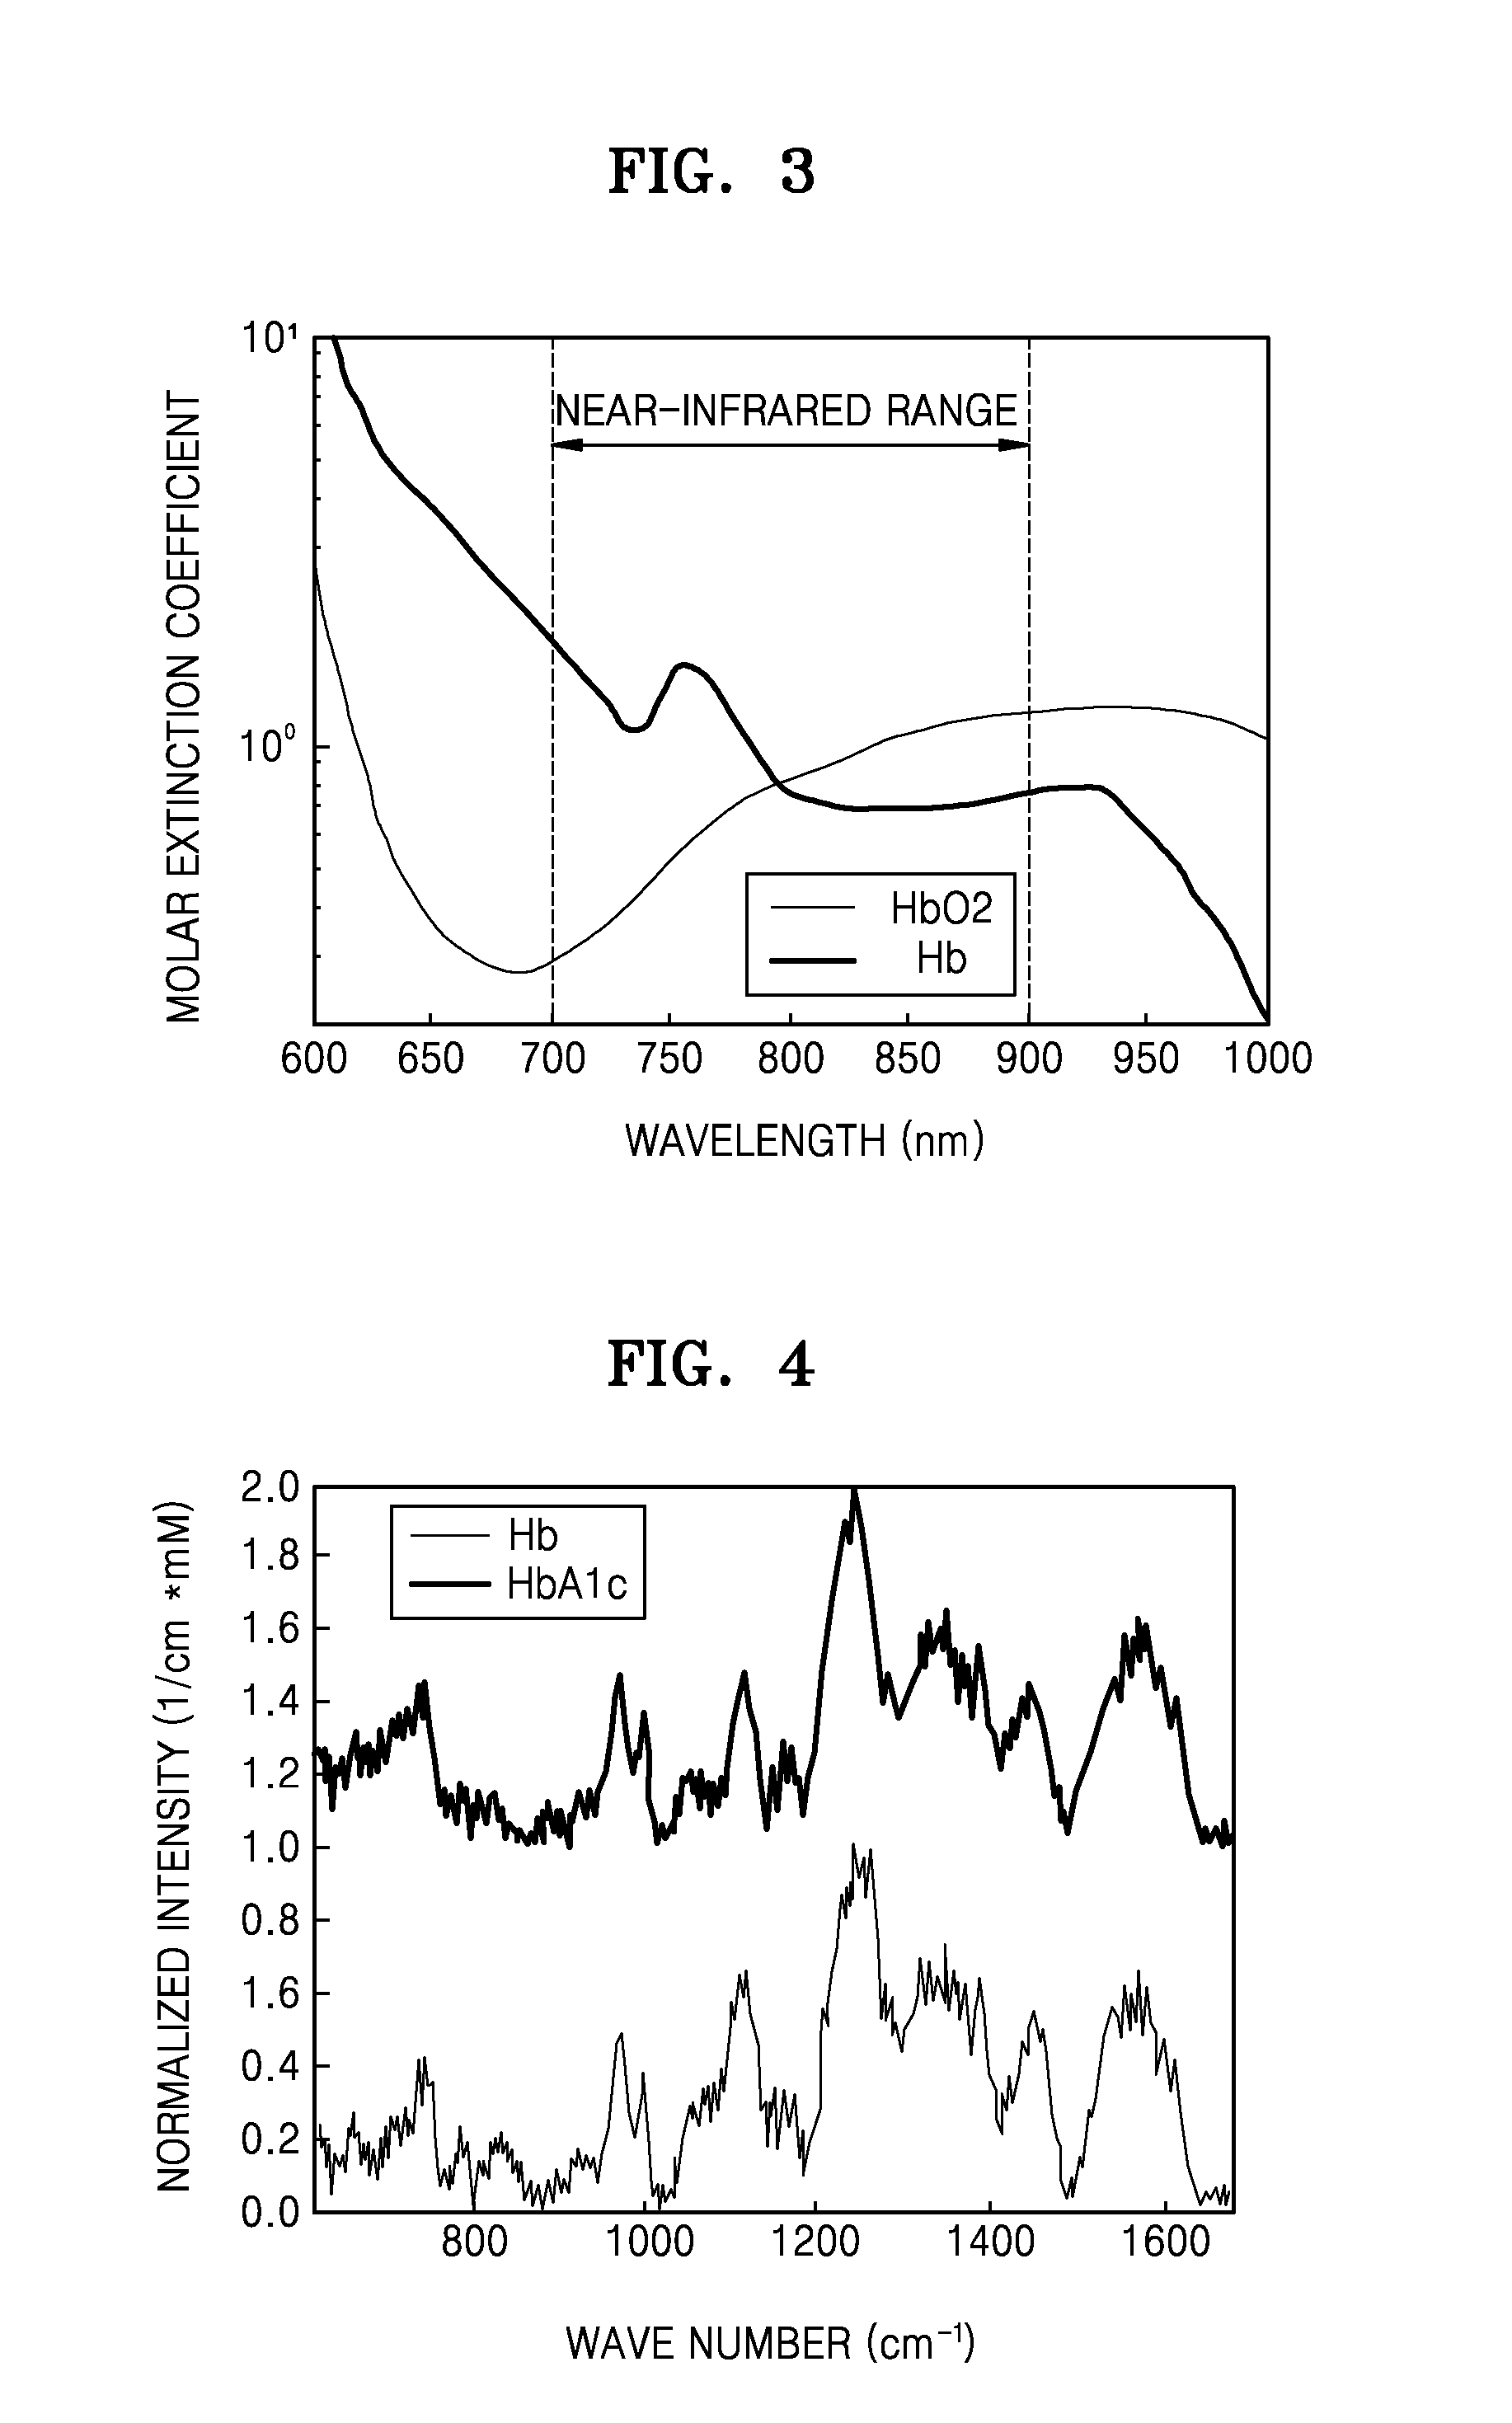 Noninvasive apparatus and method for testing glycated hemoglobin